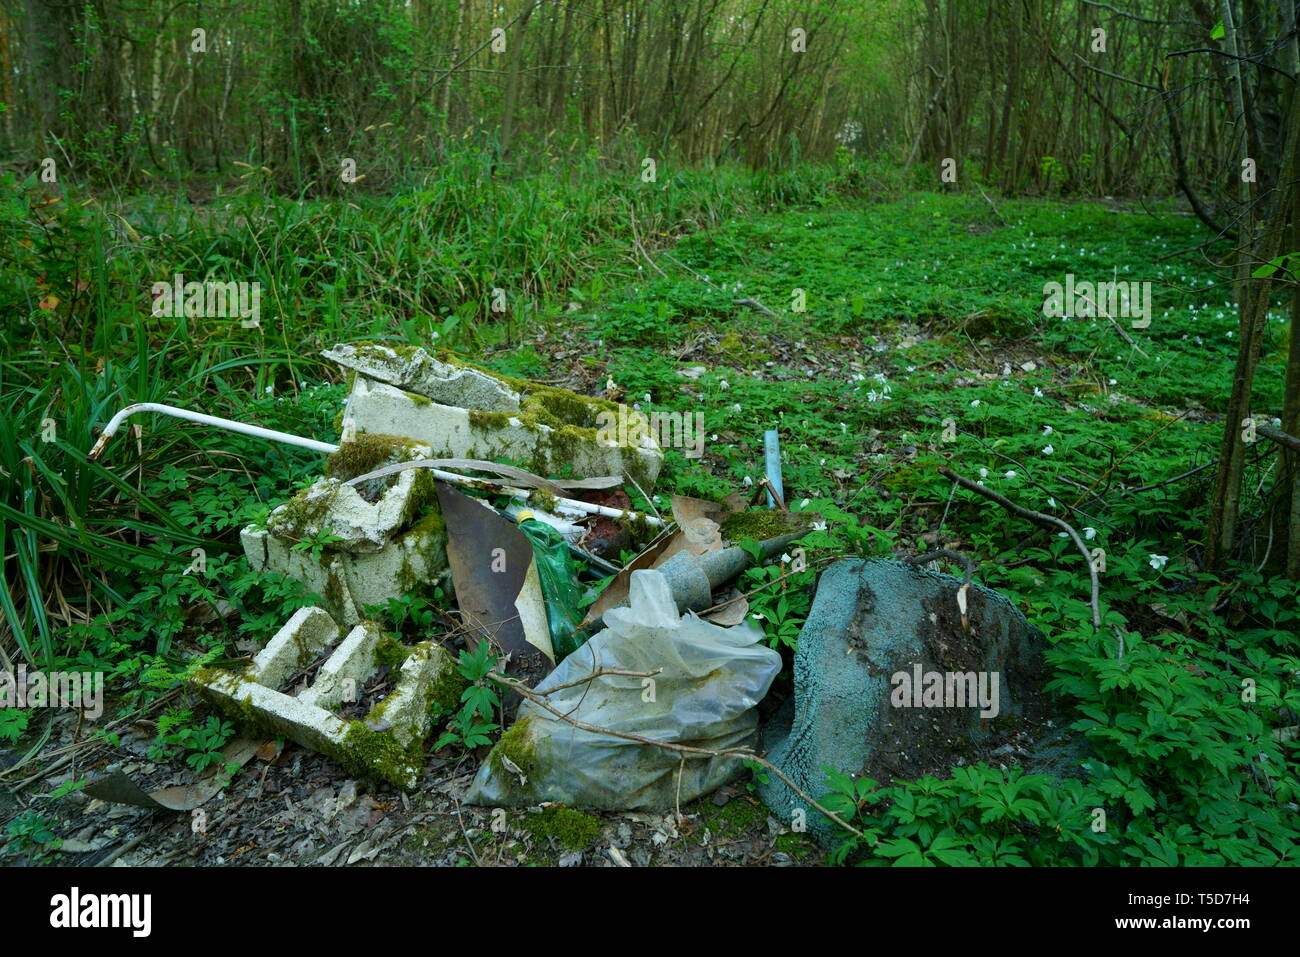 A pile of plastic rubbish in a woodland environment. Stock Photo